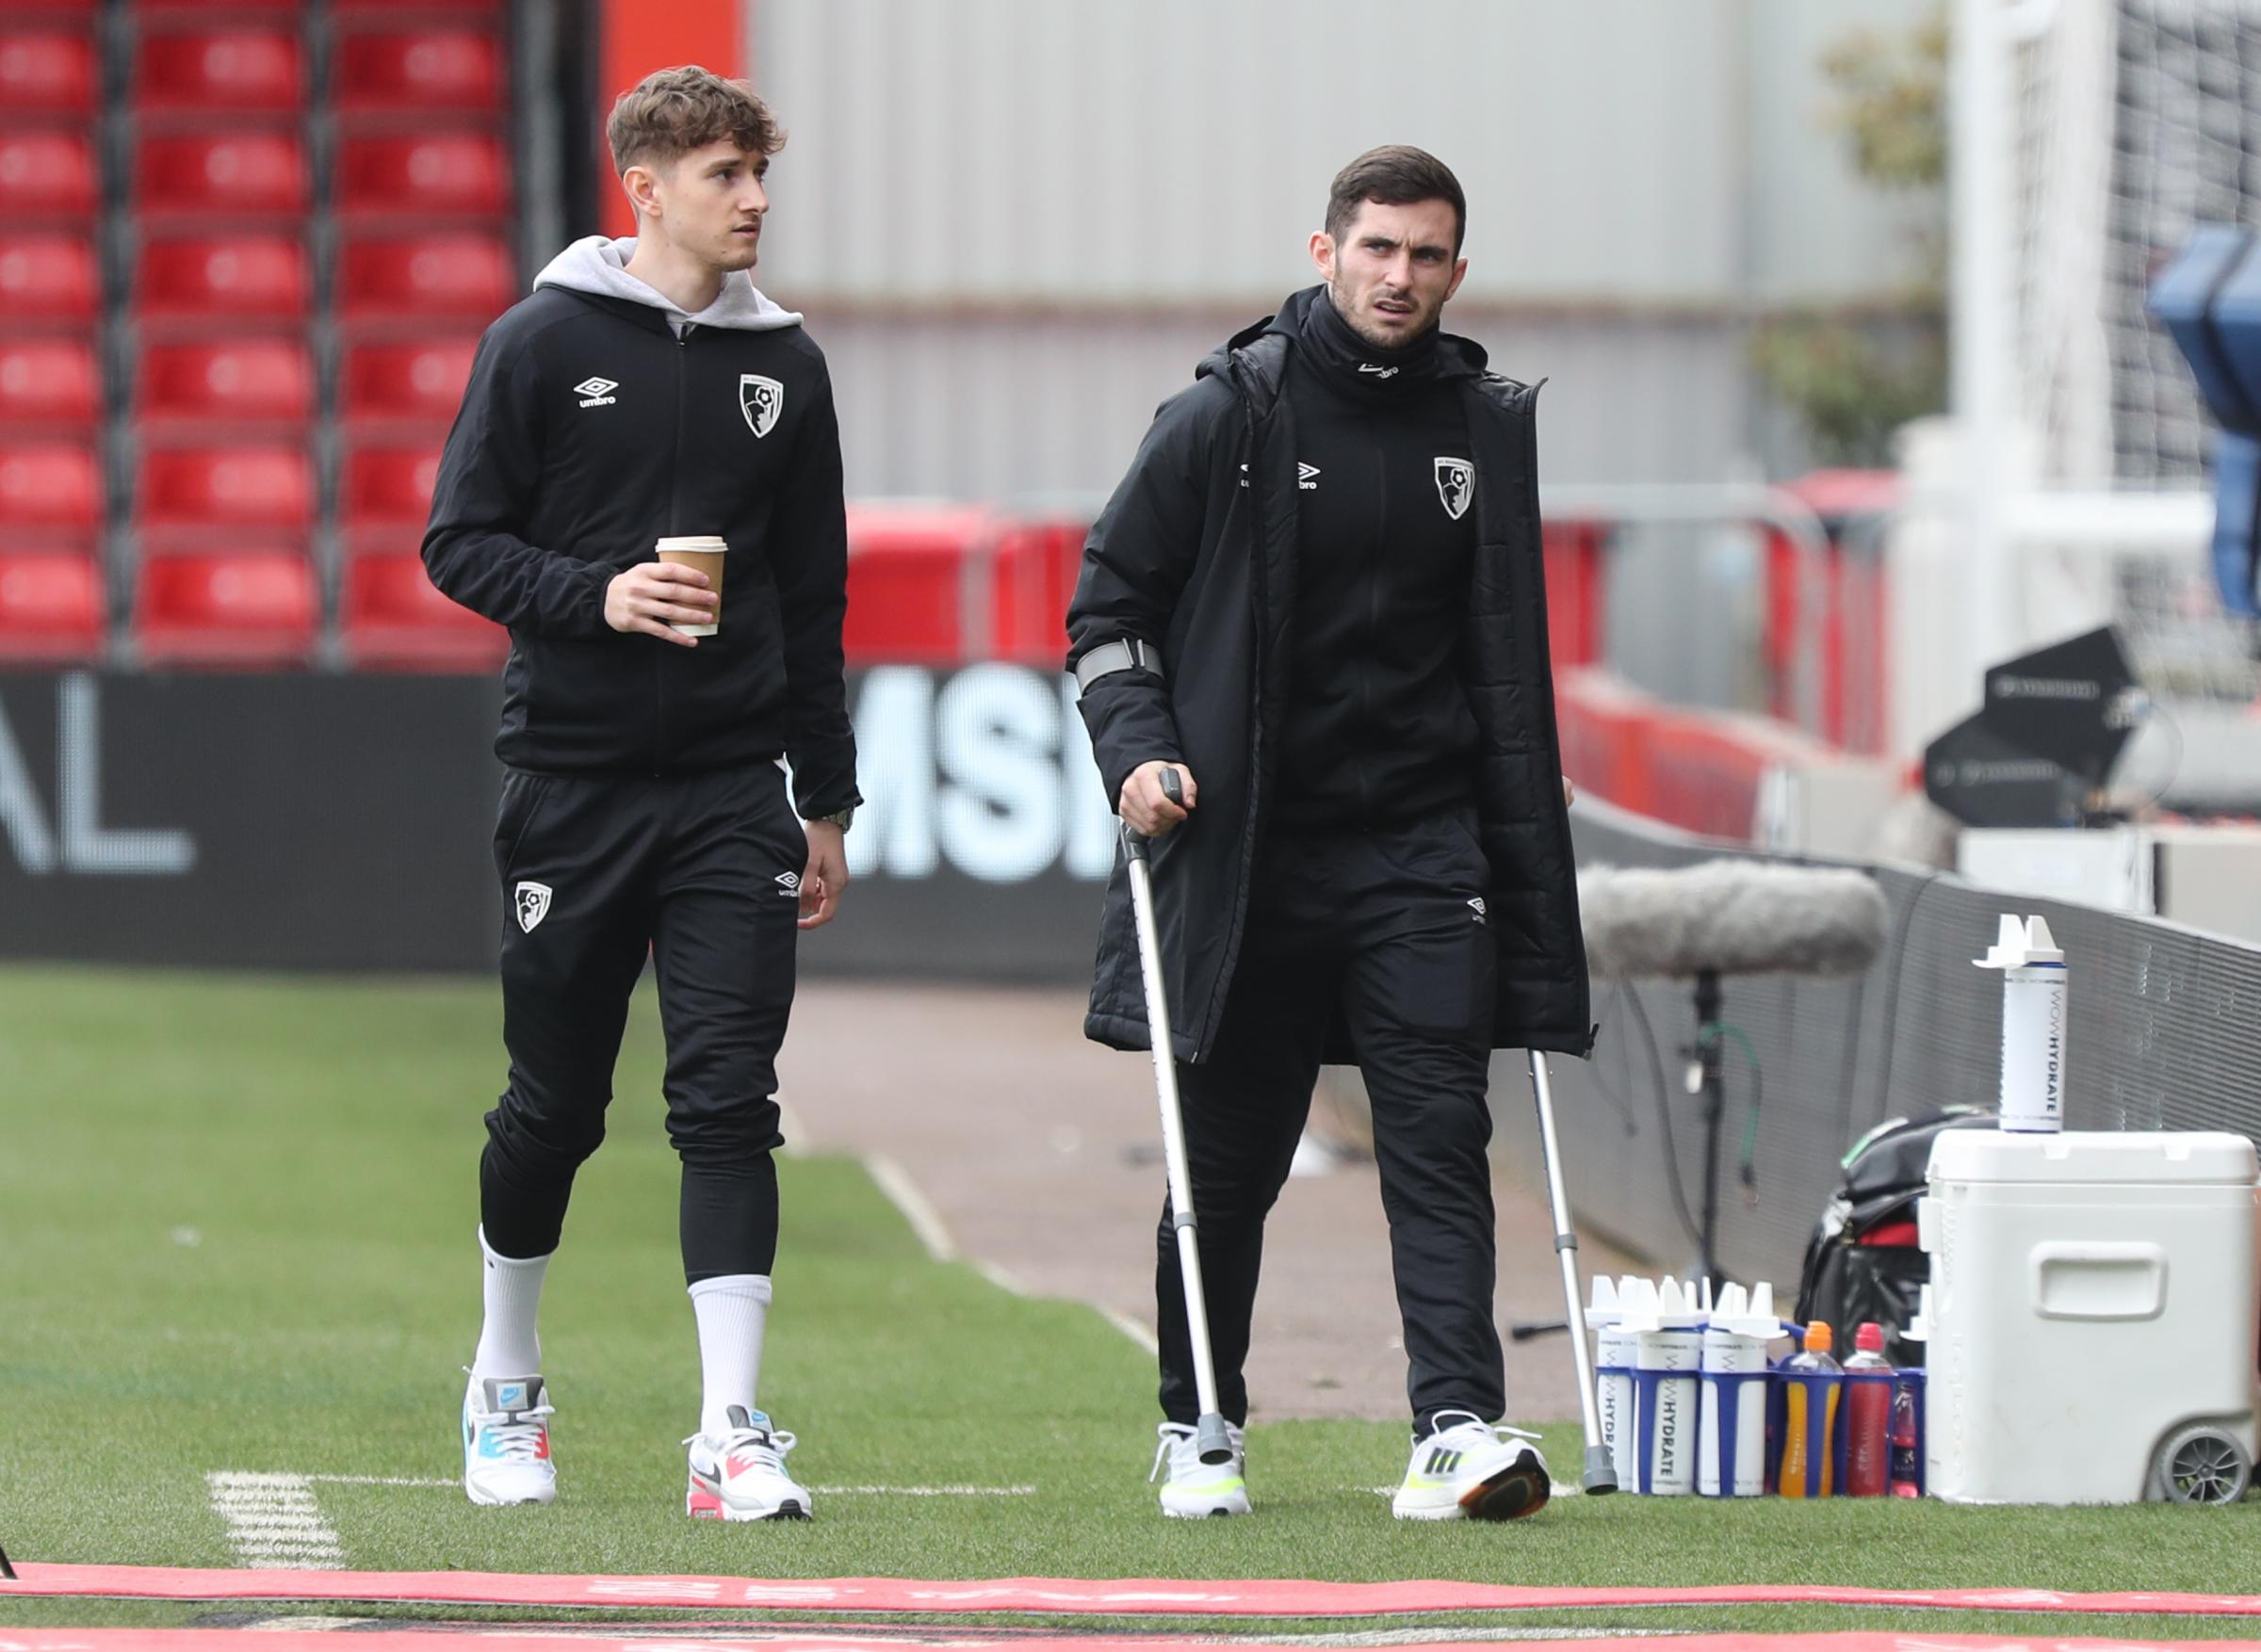 AFC Bournemouth v Southampton at Vitality Stadium in the quarter final of the FA Cup on 20th March 2021. Lewis Cook on crutches.